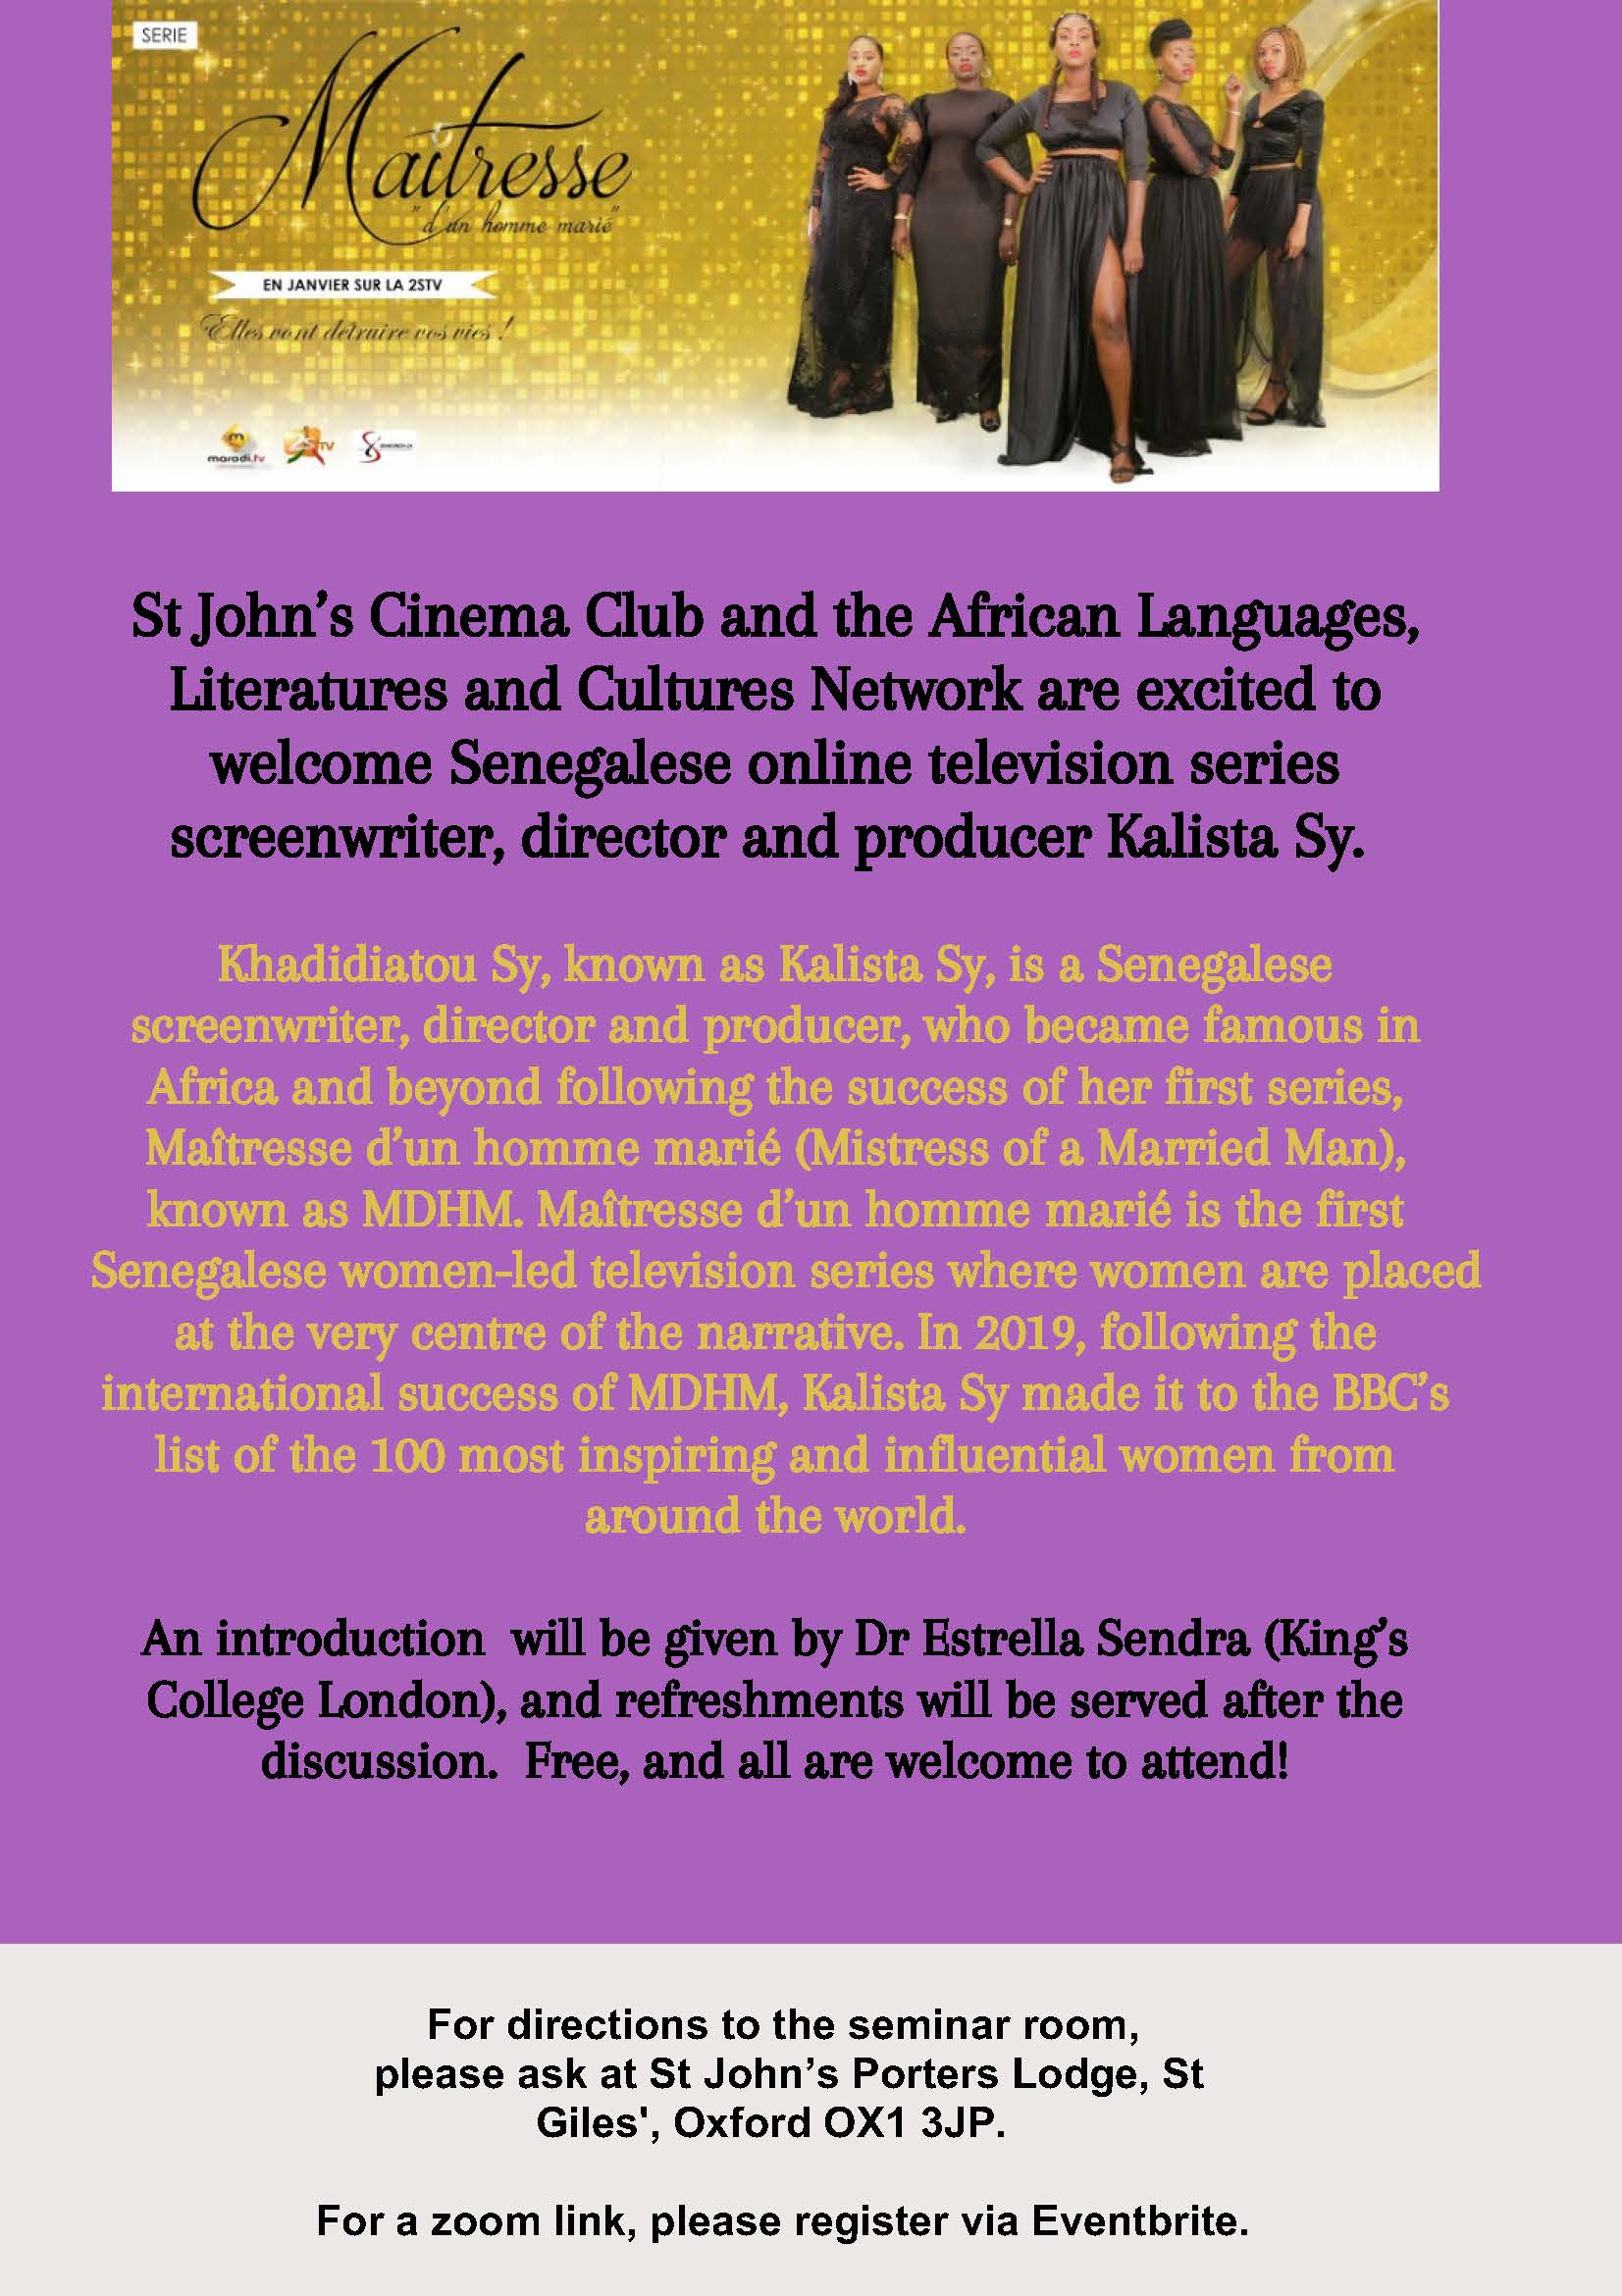 Poster for Women & Online Television in Senegal event